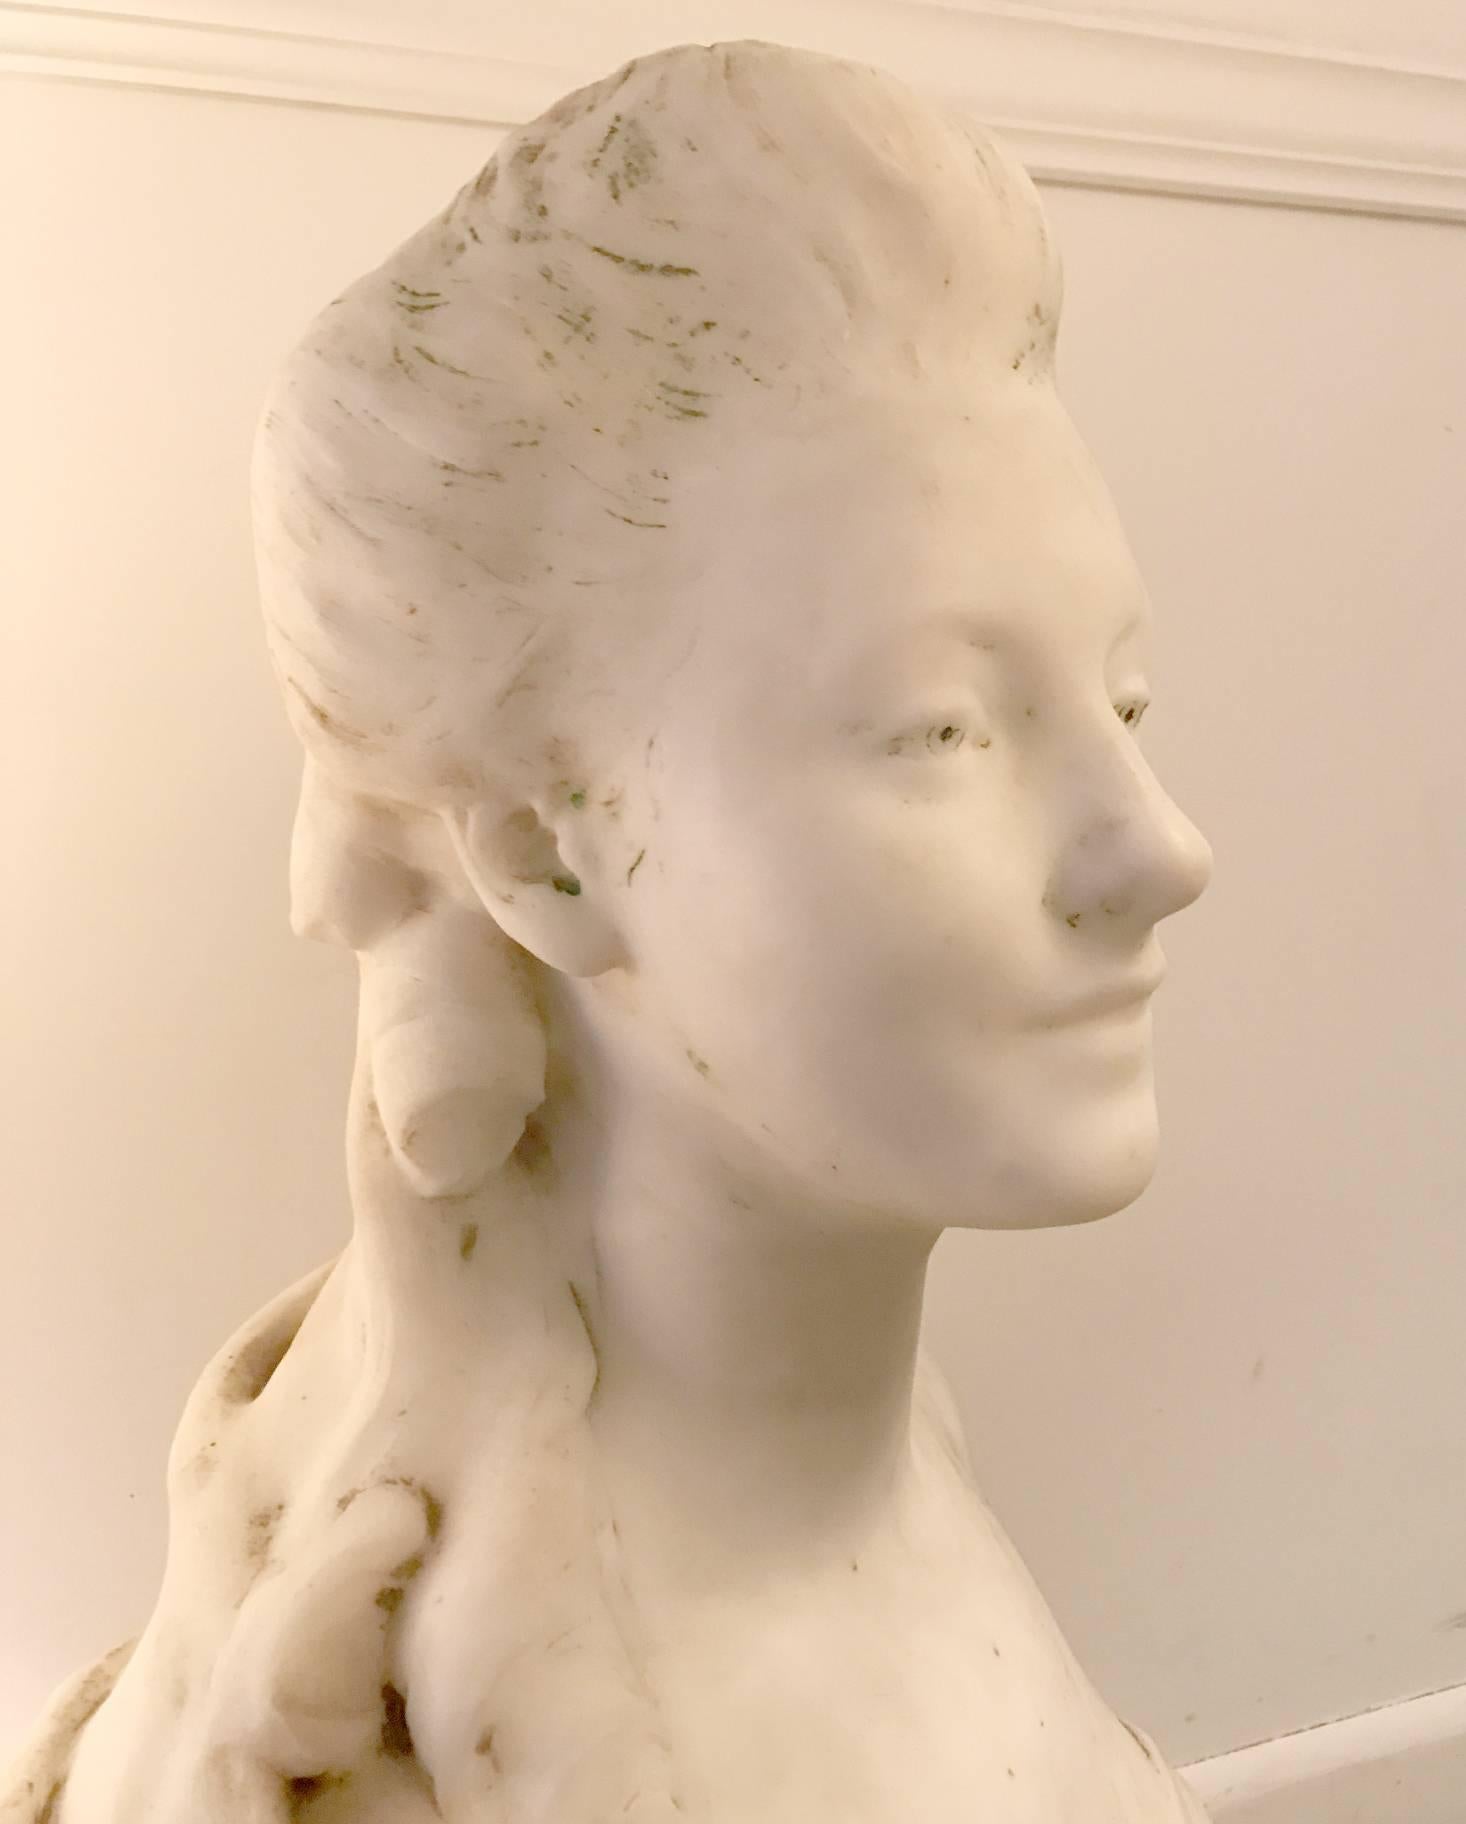 Stunning woman, depicted in this circa 1900 bust by Mercie, ready to adorn any room or garden.